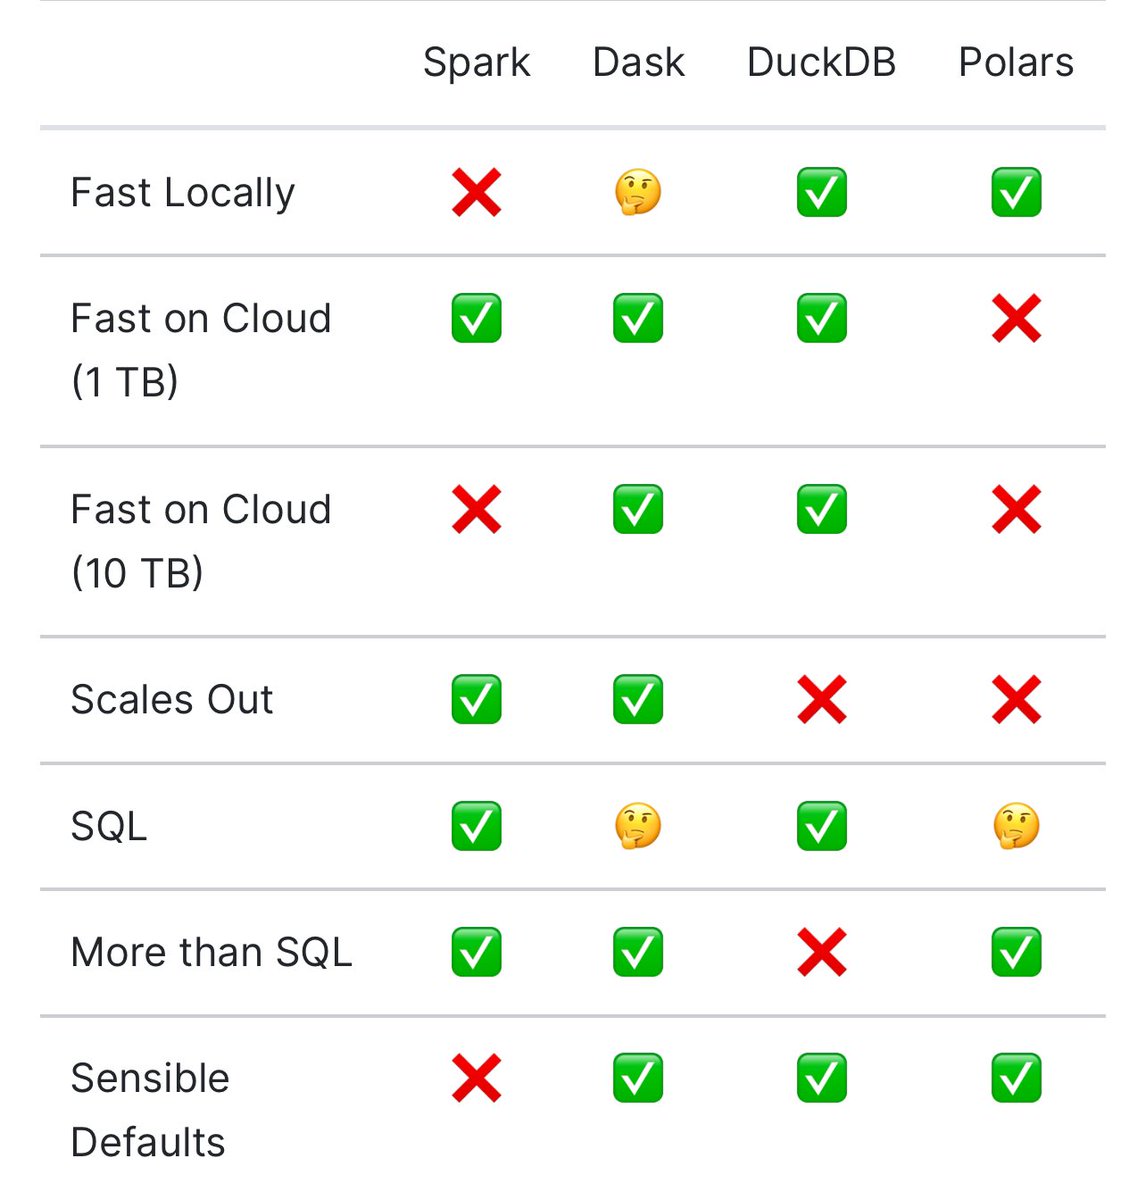 Spark still makes sense on the cloud but DuckDB is king locally. 

docs.coiled.io/blog/tpch.html